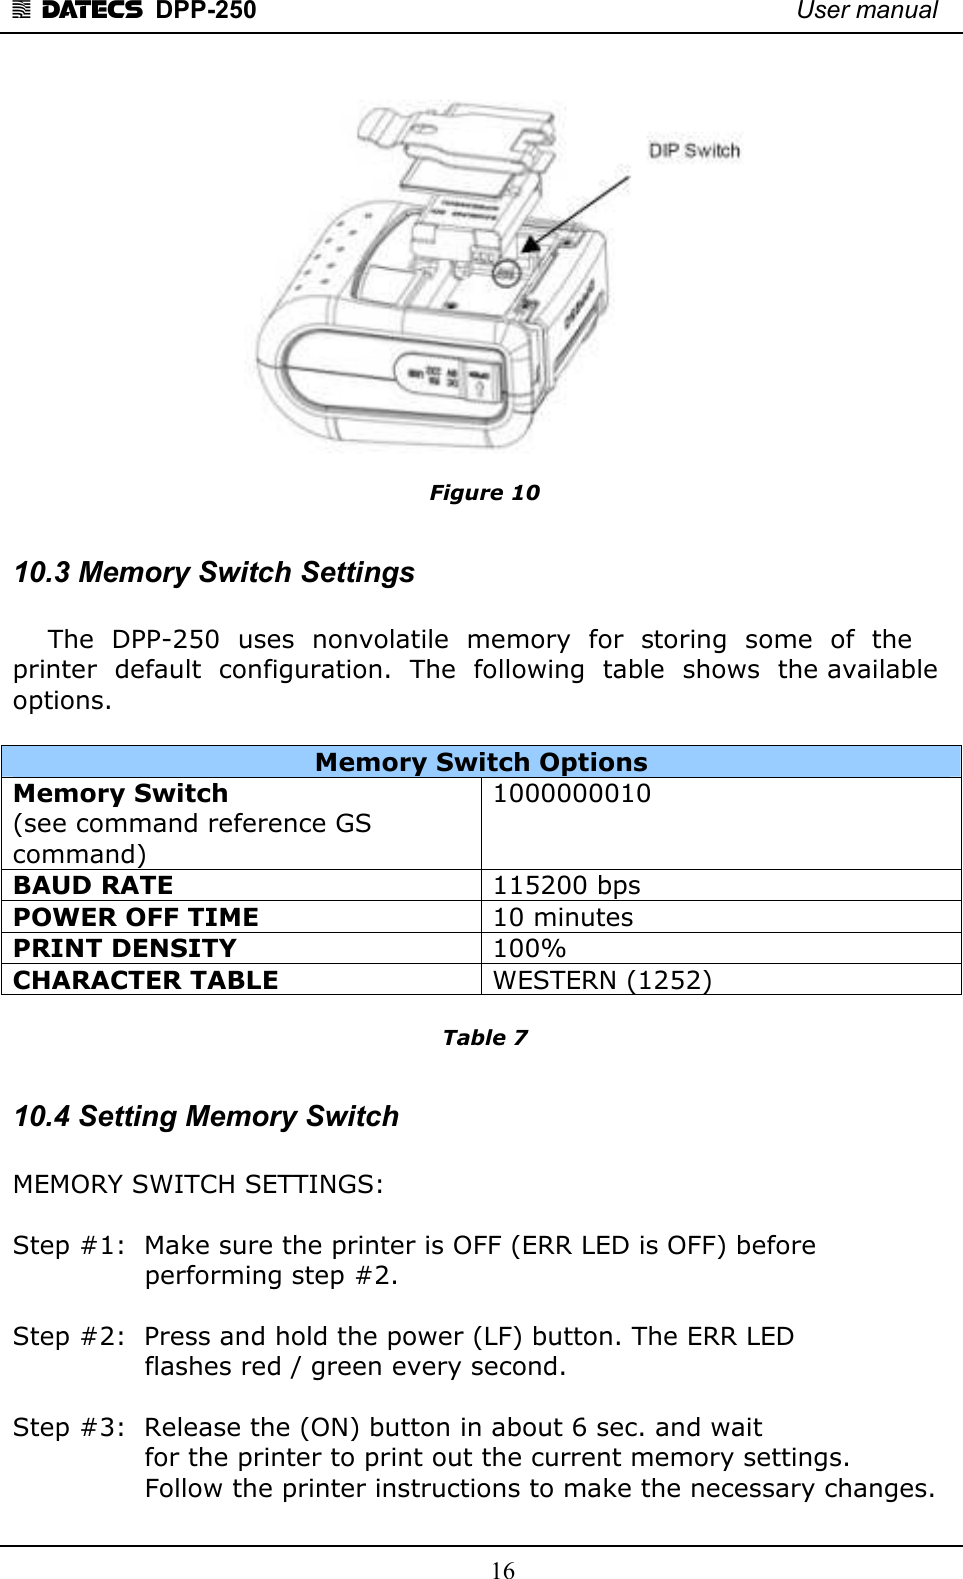 1 DATECS  DPP-250    User manual     16  Figure 10  10.3 Memory Switch Settings      The  DPP-250  uses  nonvolatile  memory  for  storing  some  of  the printer  default  configuration.  The  following  table  shows  the available options.  Memory Switch Options Memory Switch   (see command reference GS command) 1000000010 BAUD RATE  115200 bps POWER OFF TIME  10 minutes PRINT DENSITY  100% CHARACTER TABLE  WESTERN (1252)  Table 7  10.4 Setting Memory Switch  MEMORY SWITCH SETTINGS:   Step #1:  Make sure the printer is OFF (ERR LED is OFF) before                 performing step #2.    Step #2:  Press and hold the power (LF) button. The ERR LED                  flashes red / green every second.   Step #3:  Release the (ON) button in about 6 sec. and wait                  for the printer to print out the current memory settings.                 Follow the printer instructions to make the necessary changes.  